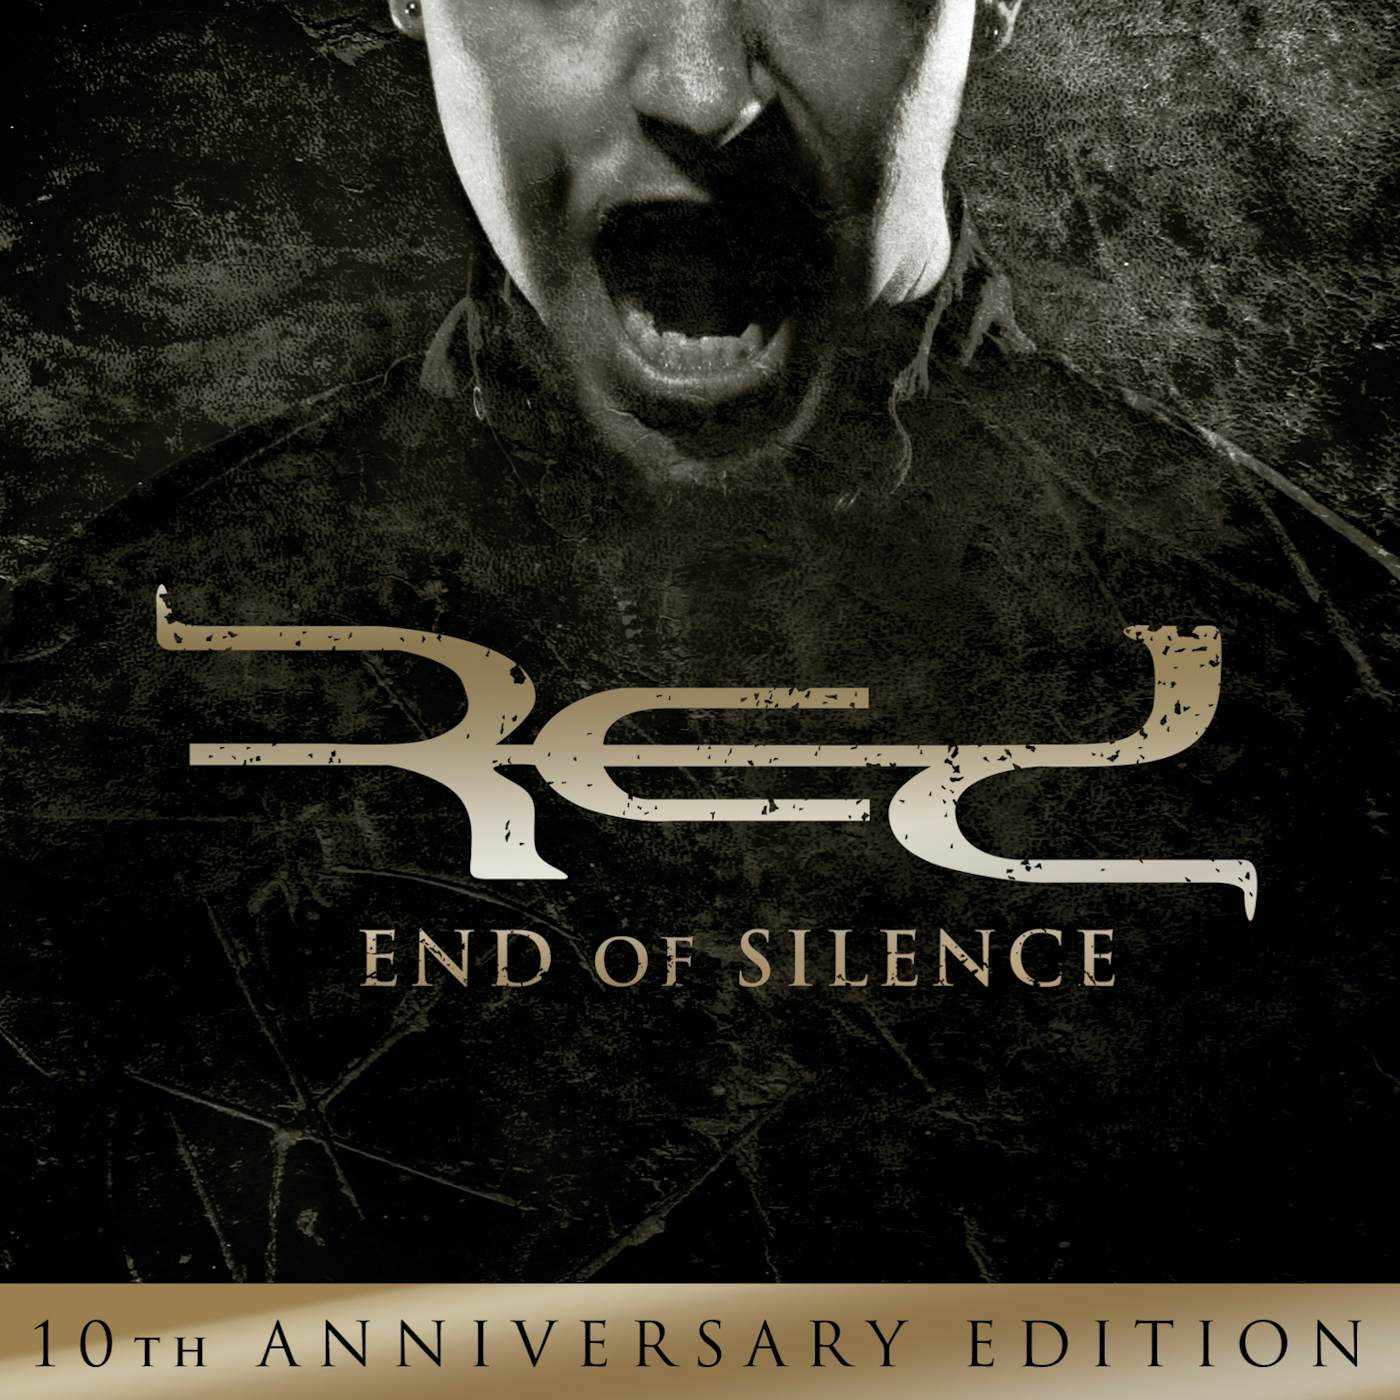 Red END OF SILENCE: 10TH ANNIVERSARY EDITION CD